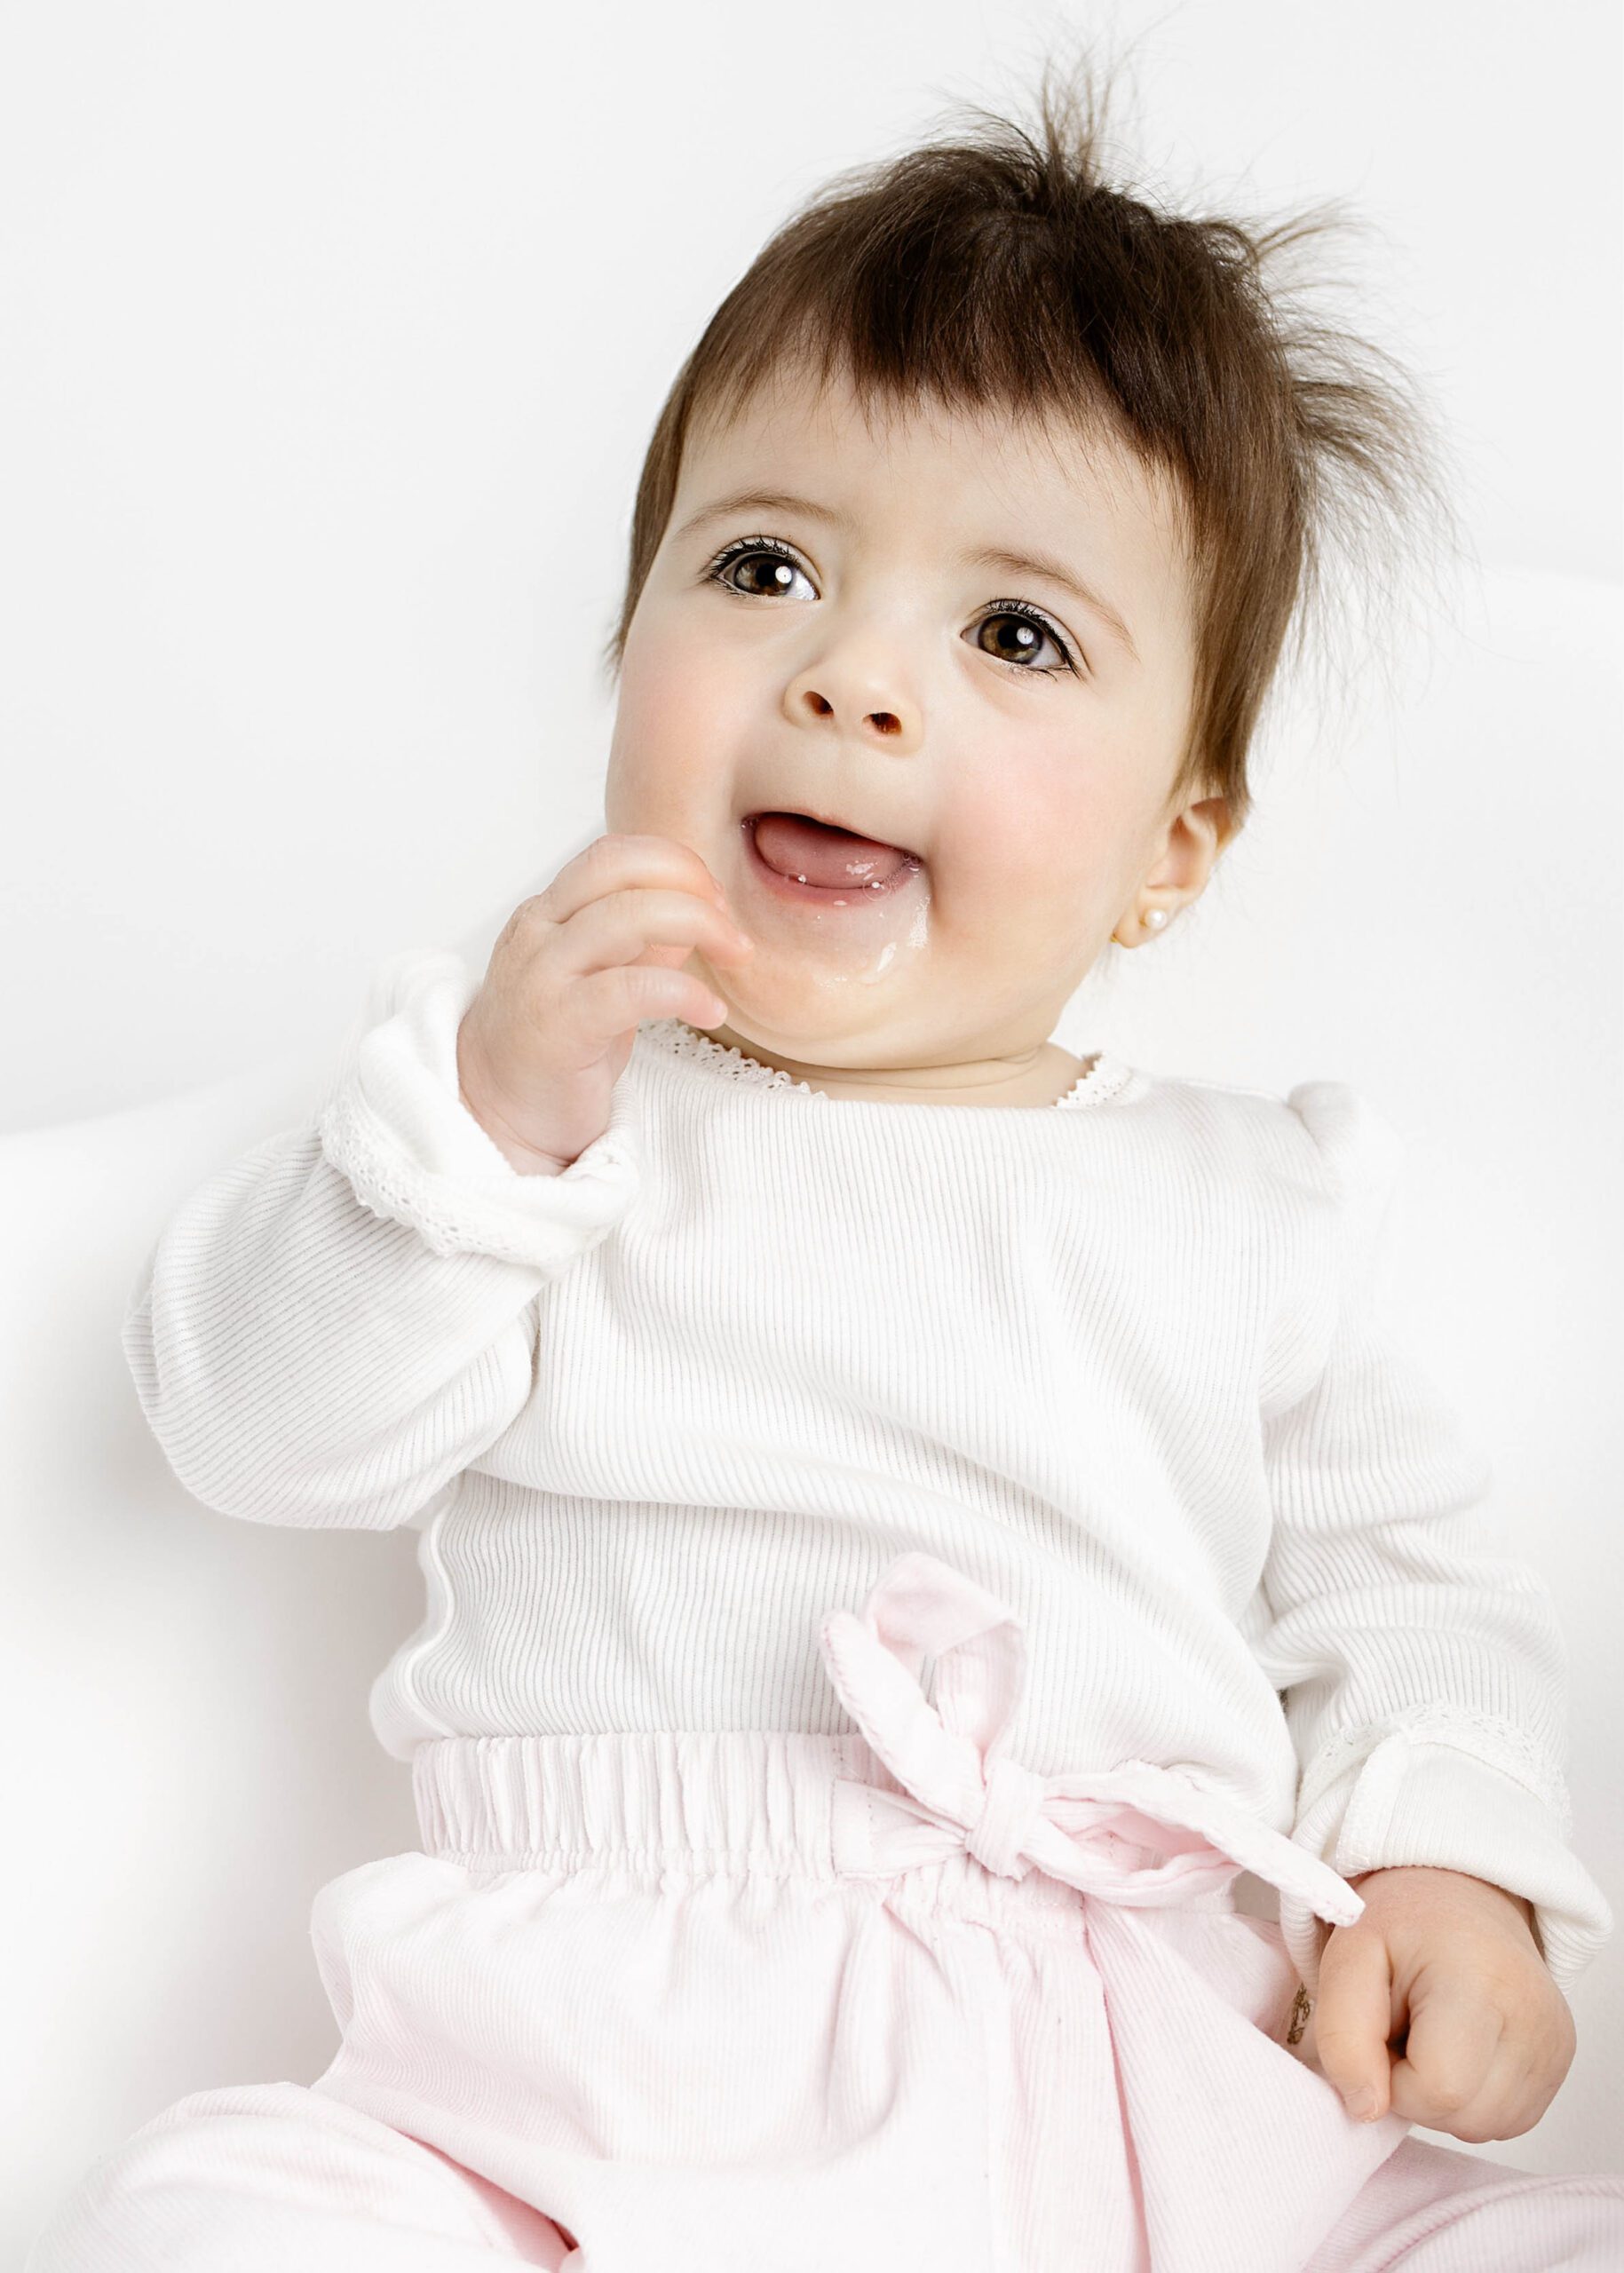 baby girl giggling by baby photography dallas